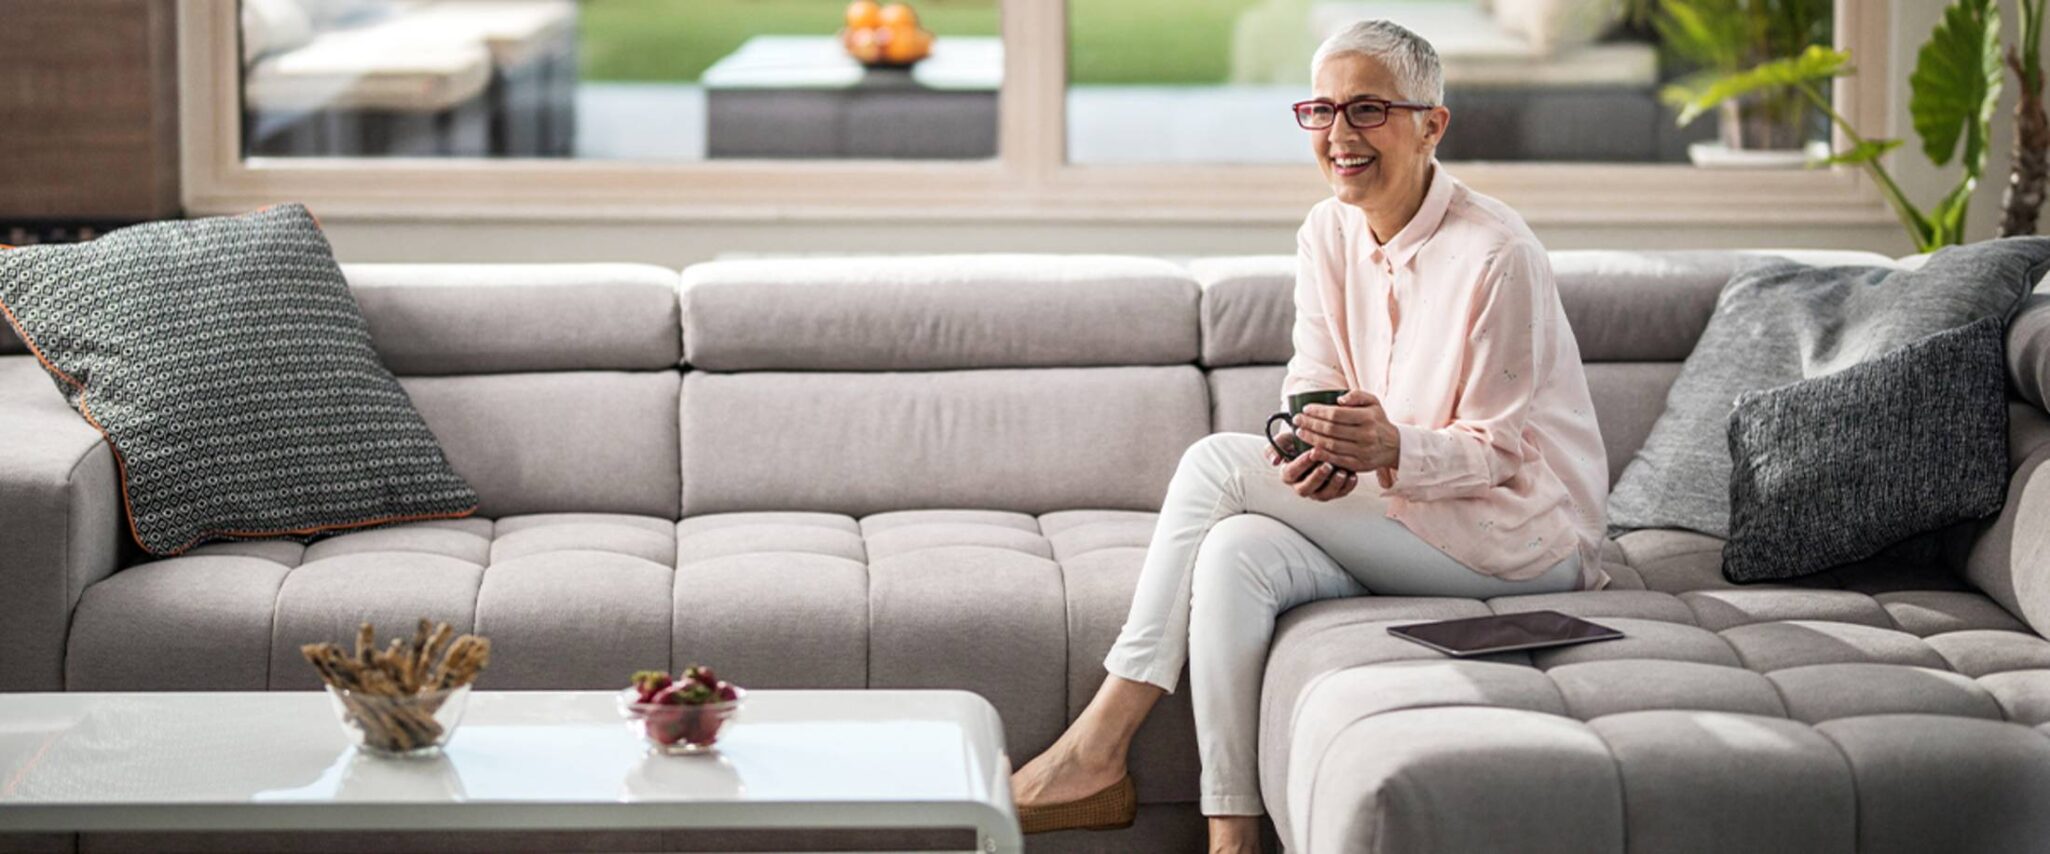 senior woman sitting on her couch in a senior living apartment